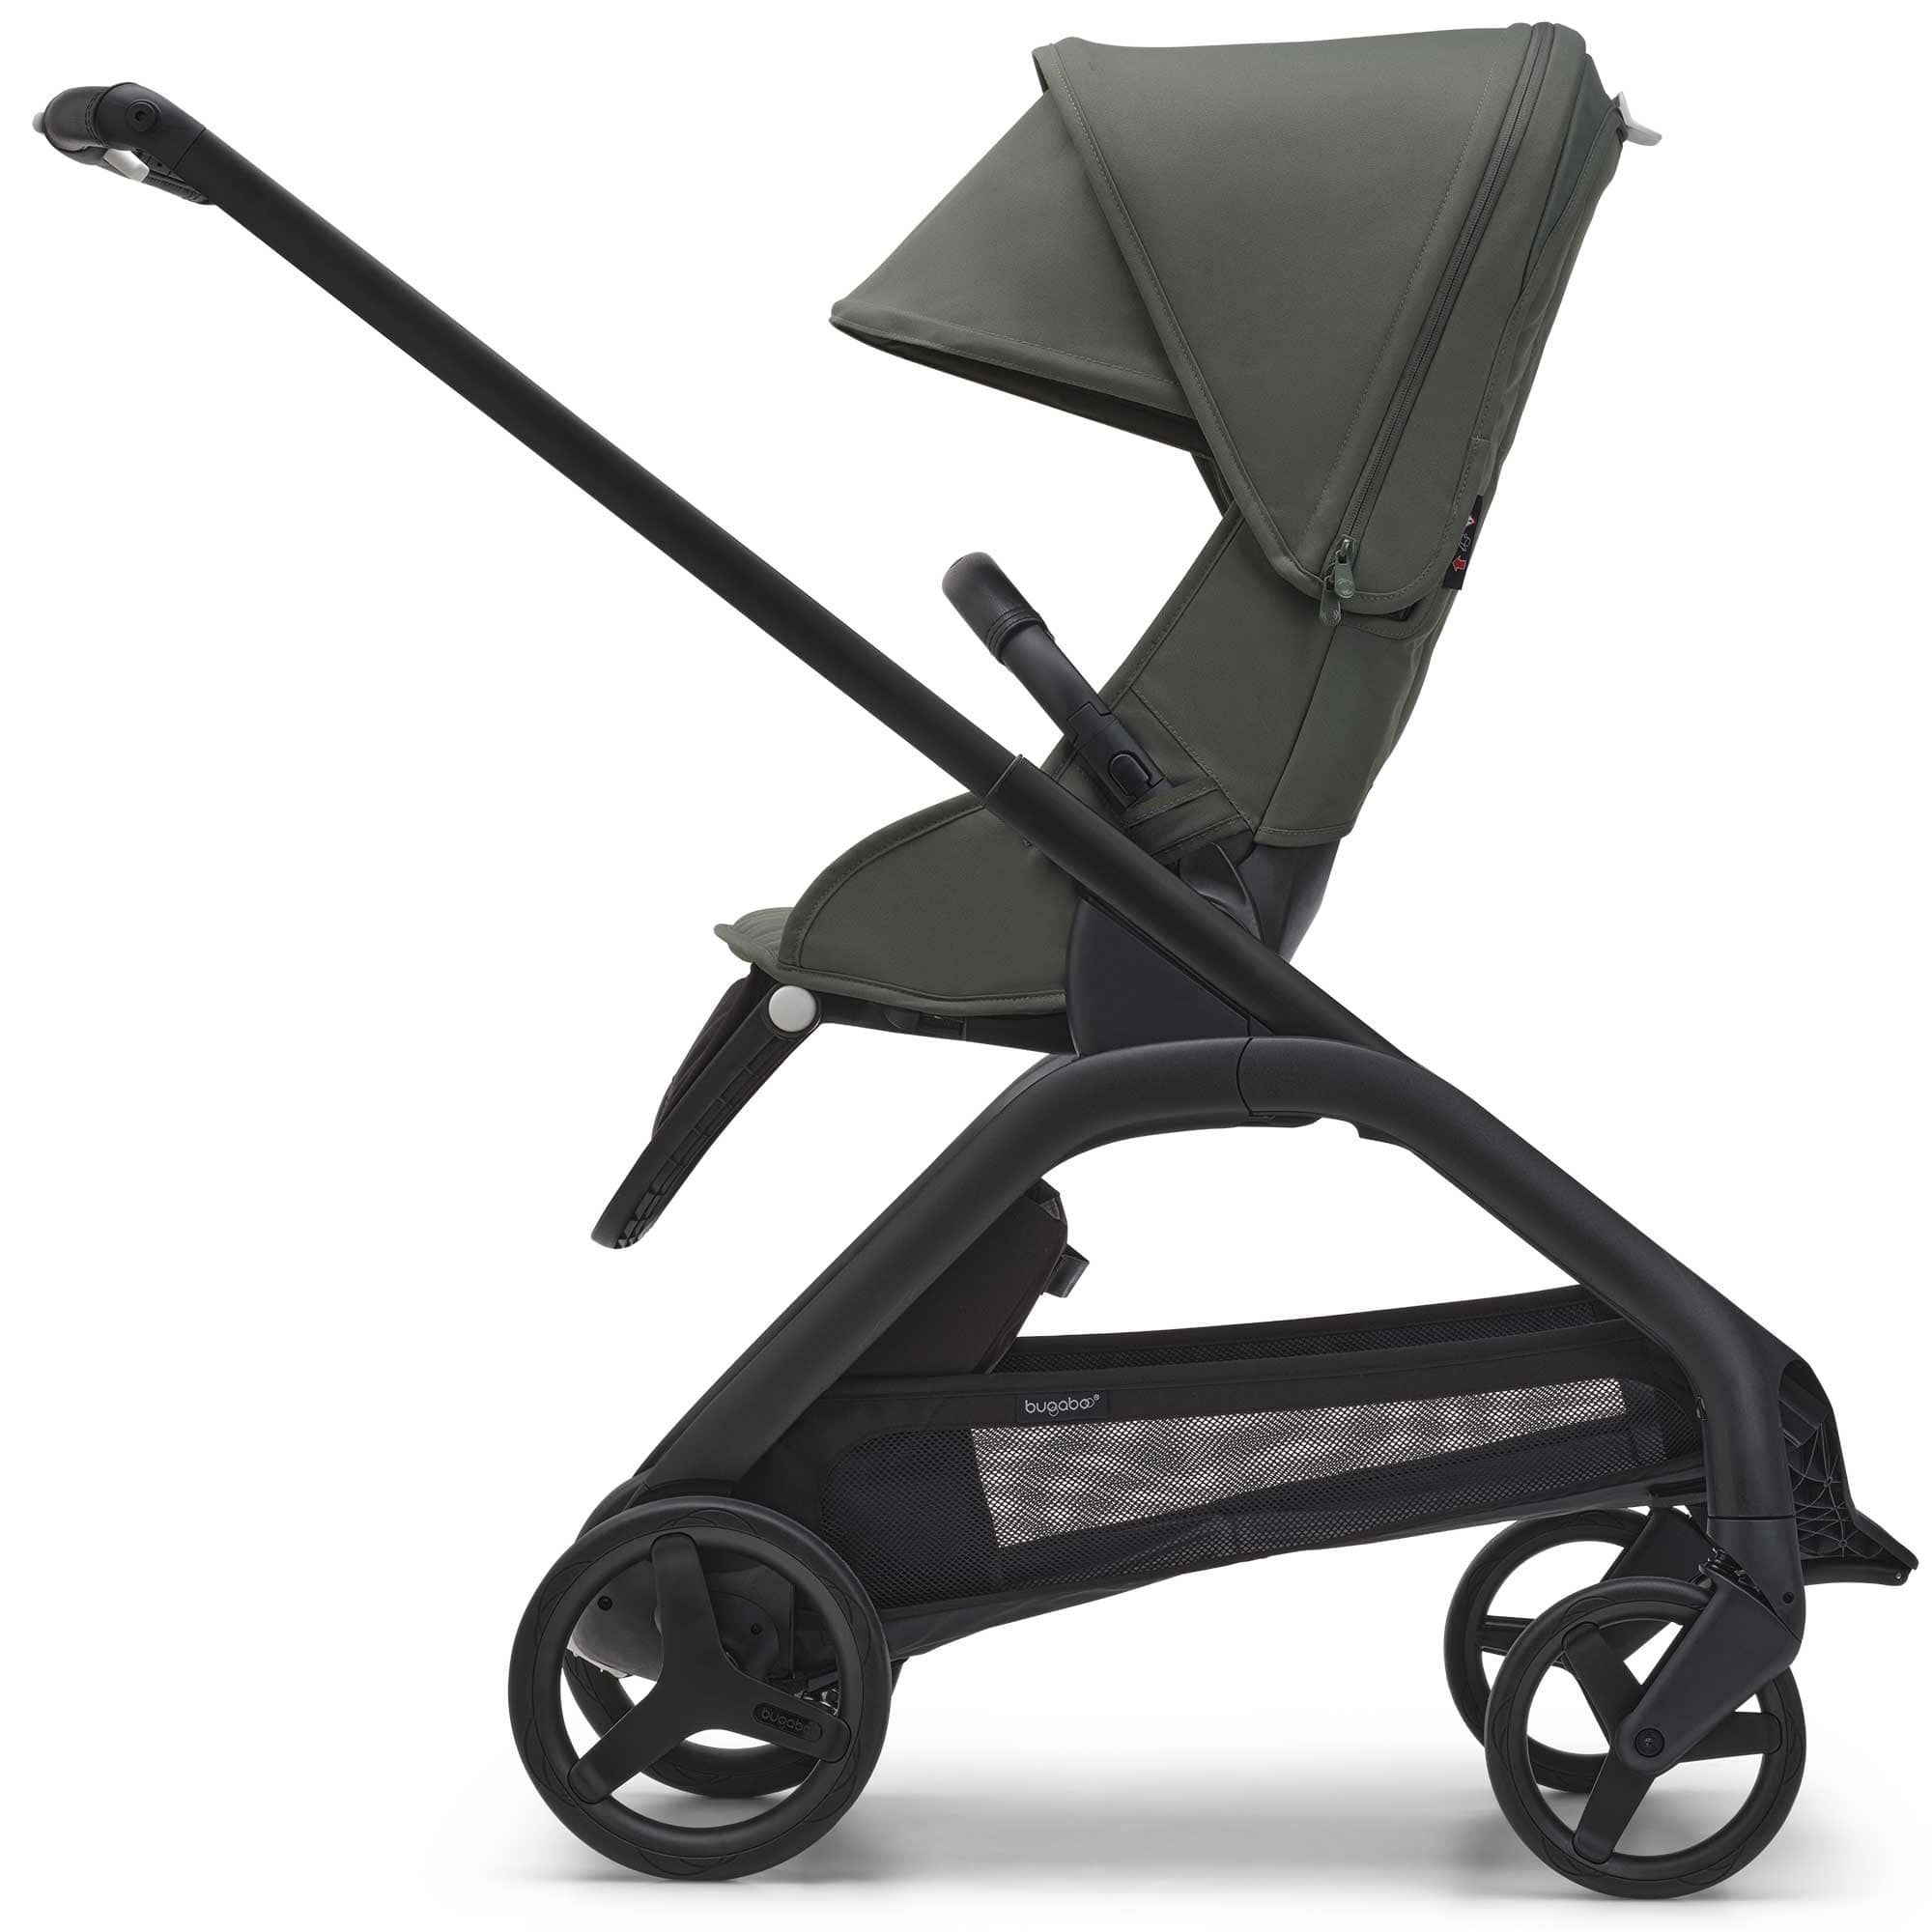 Bugaboo Travel Systems Bugaboo Dragonfly Pebble 360 Pro Travel System - Black/Forest Green 13818-BLK-FOR-GRN